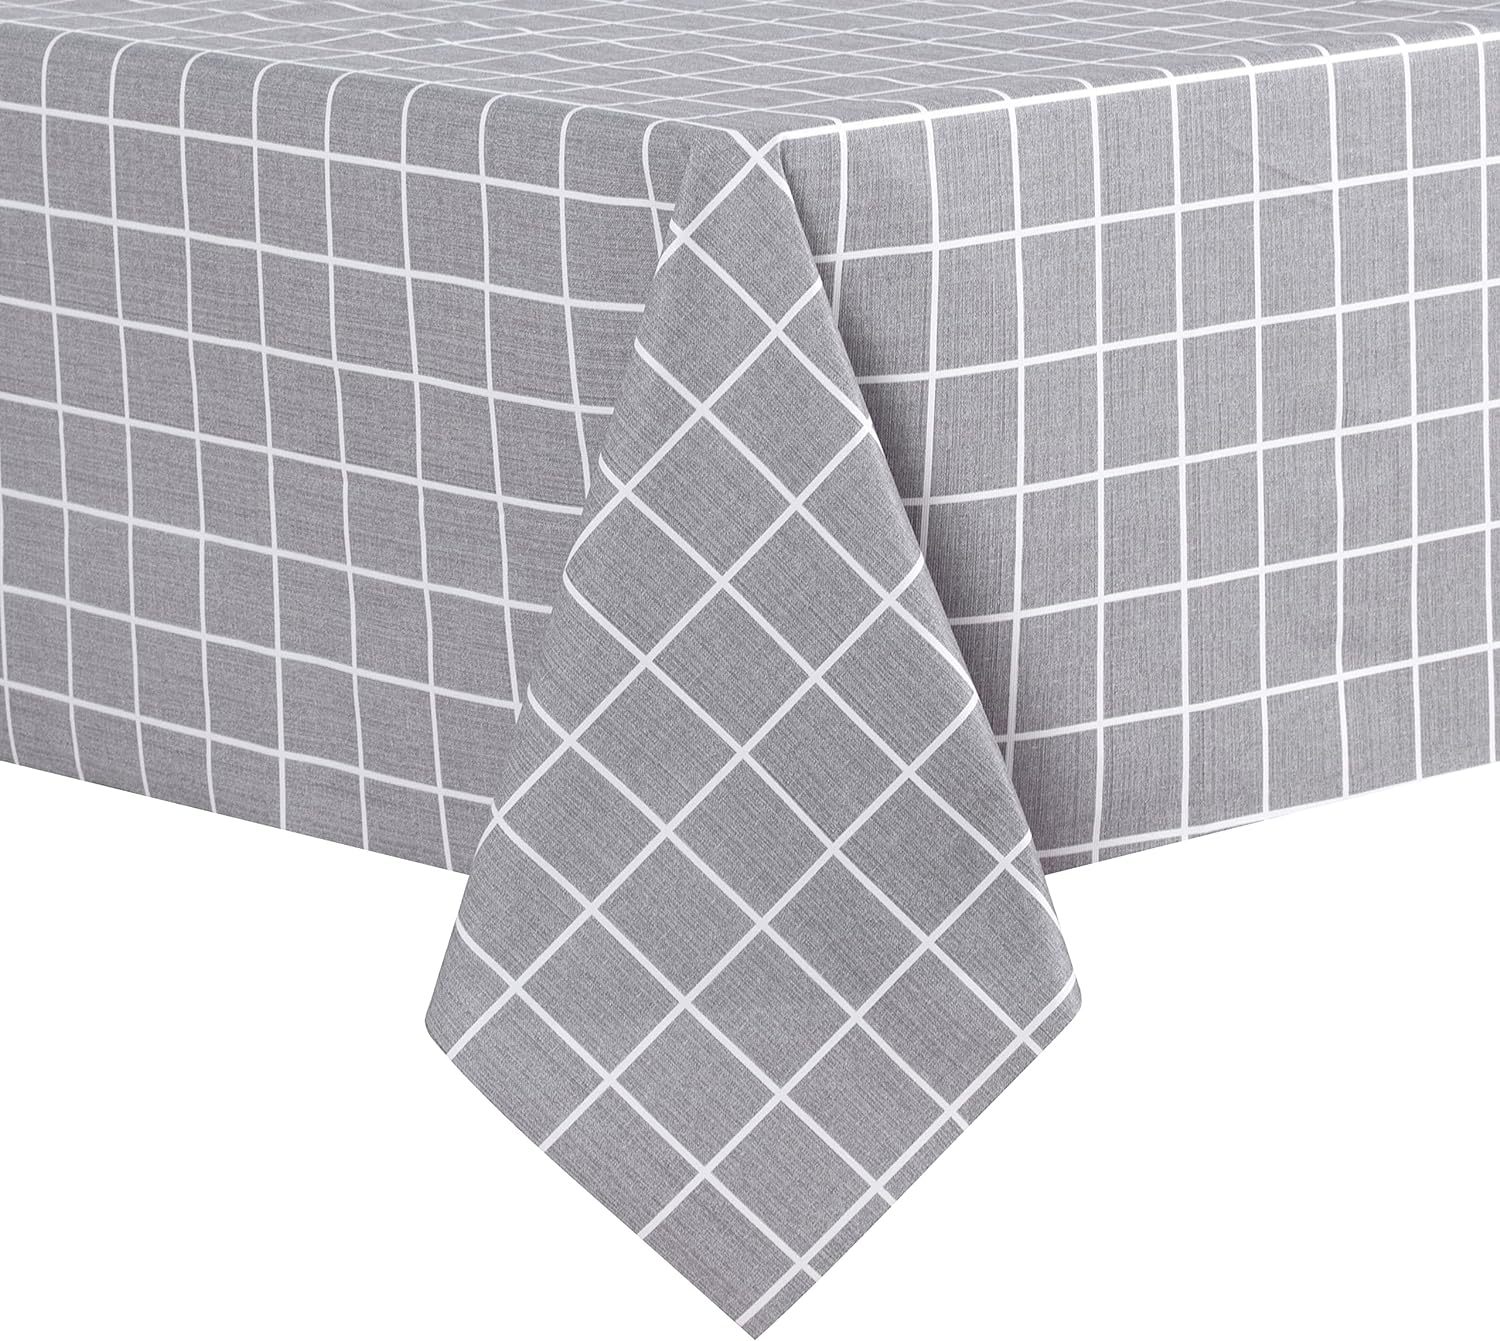 sancua Checkered Vinyl Rectangle Tablecloth - 54 x 78 Inch - 100% Waterproof Oil Proof Spill Proof PVC Table Cloth, Wipe Clean Table Cover for Dining Table, Buffet Parties and Camping, Grey Checkered